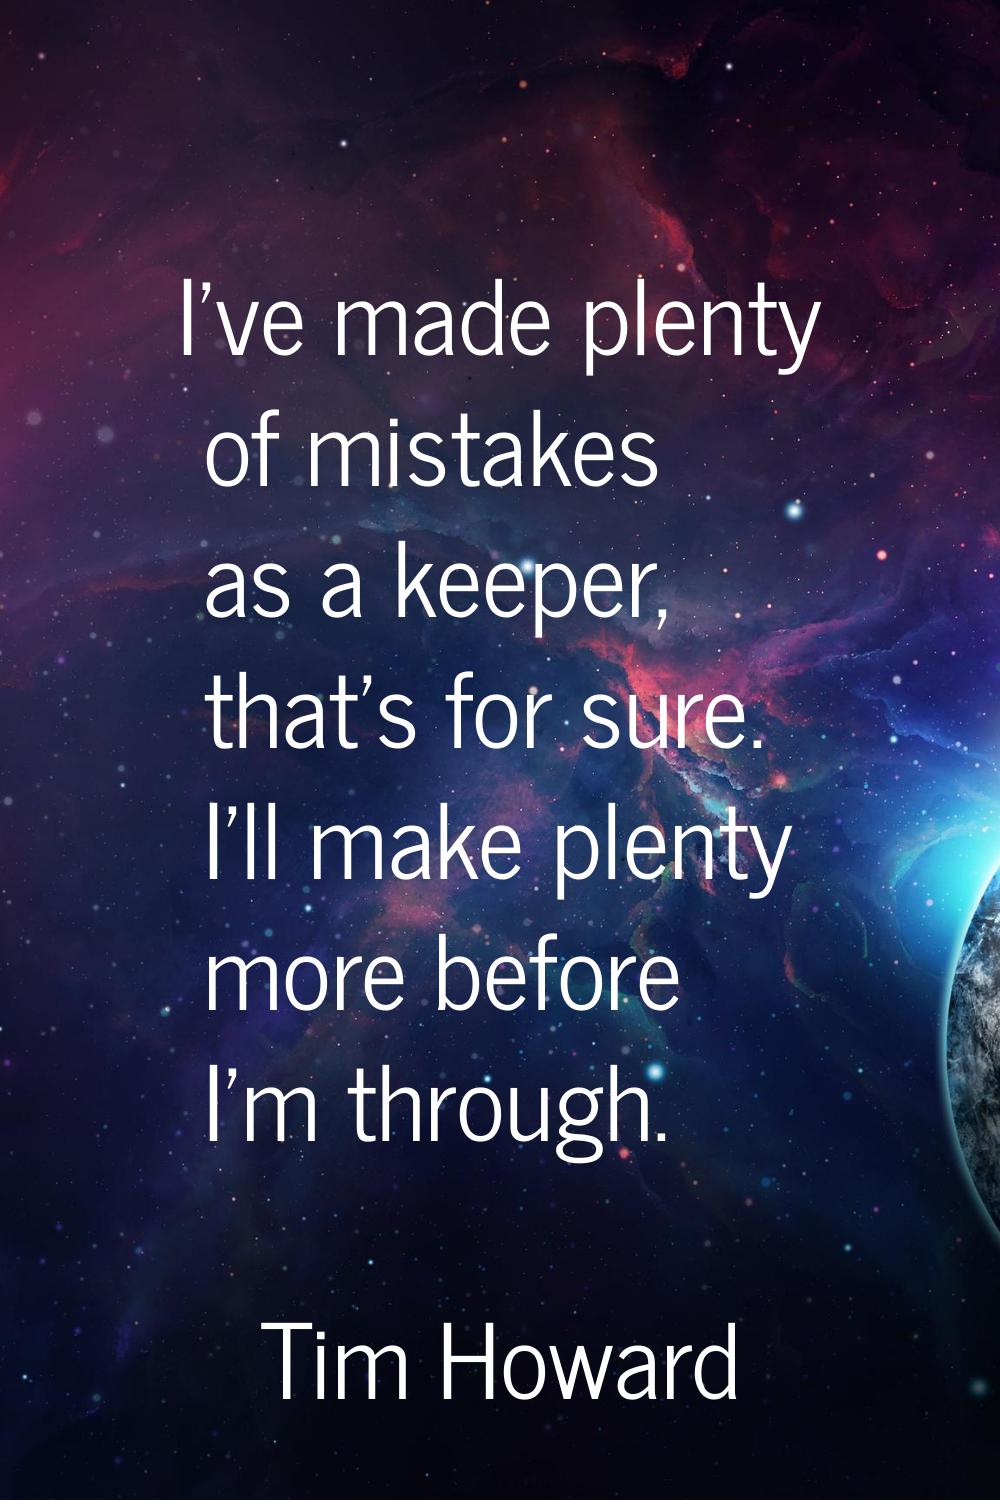 I've made plenty of mistakes as a keeper, that's for sure. I'll make plenty more before I'm through